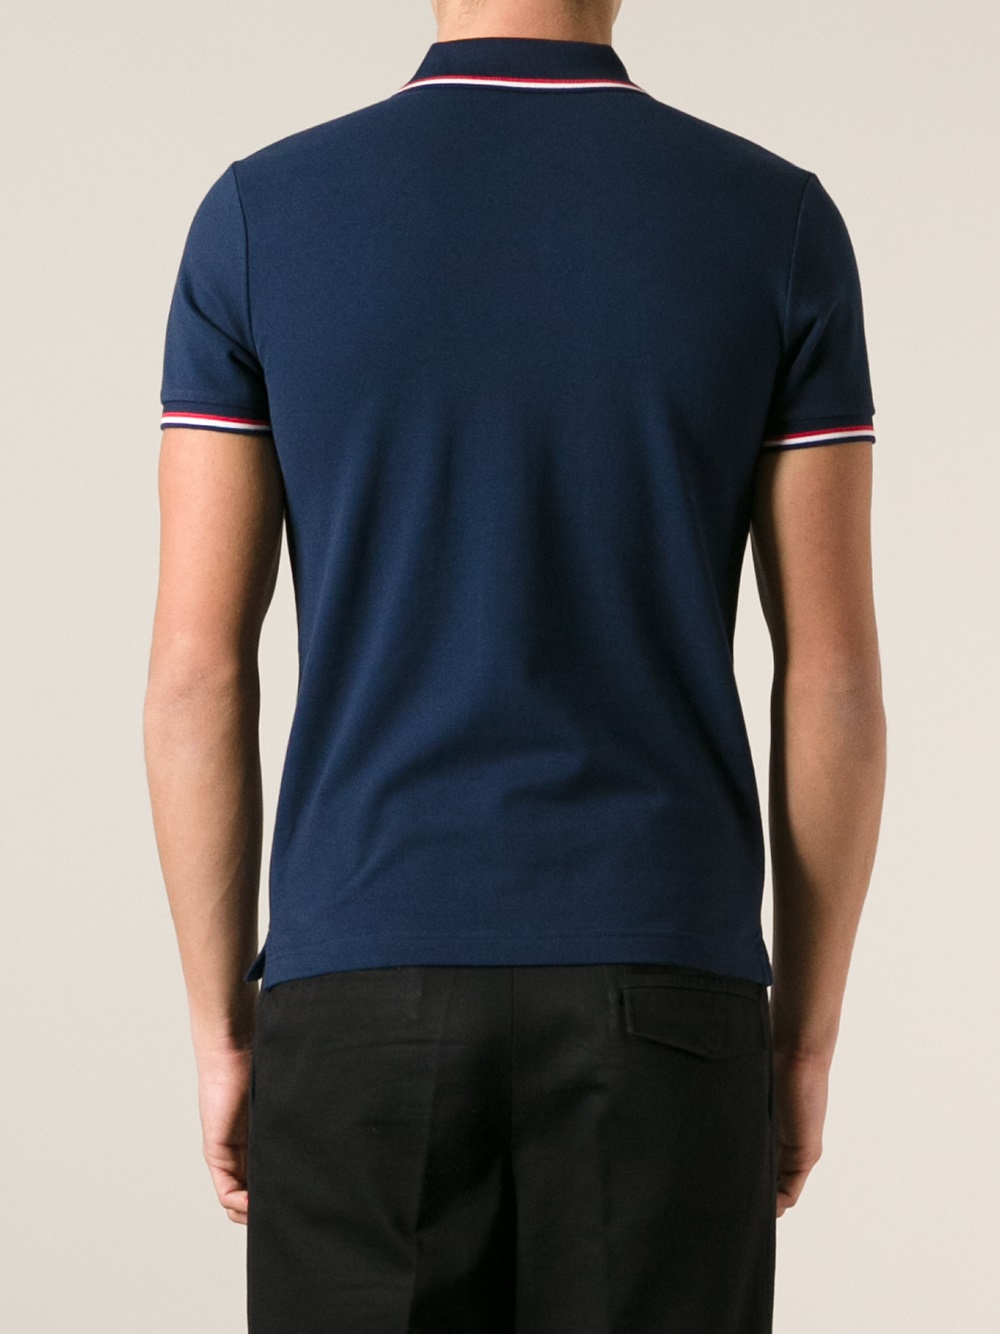 Lyst - Moncler Classic Polo Shirt in Blue for Men